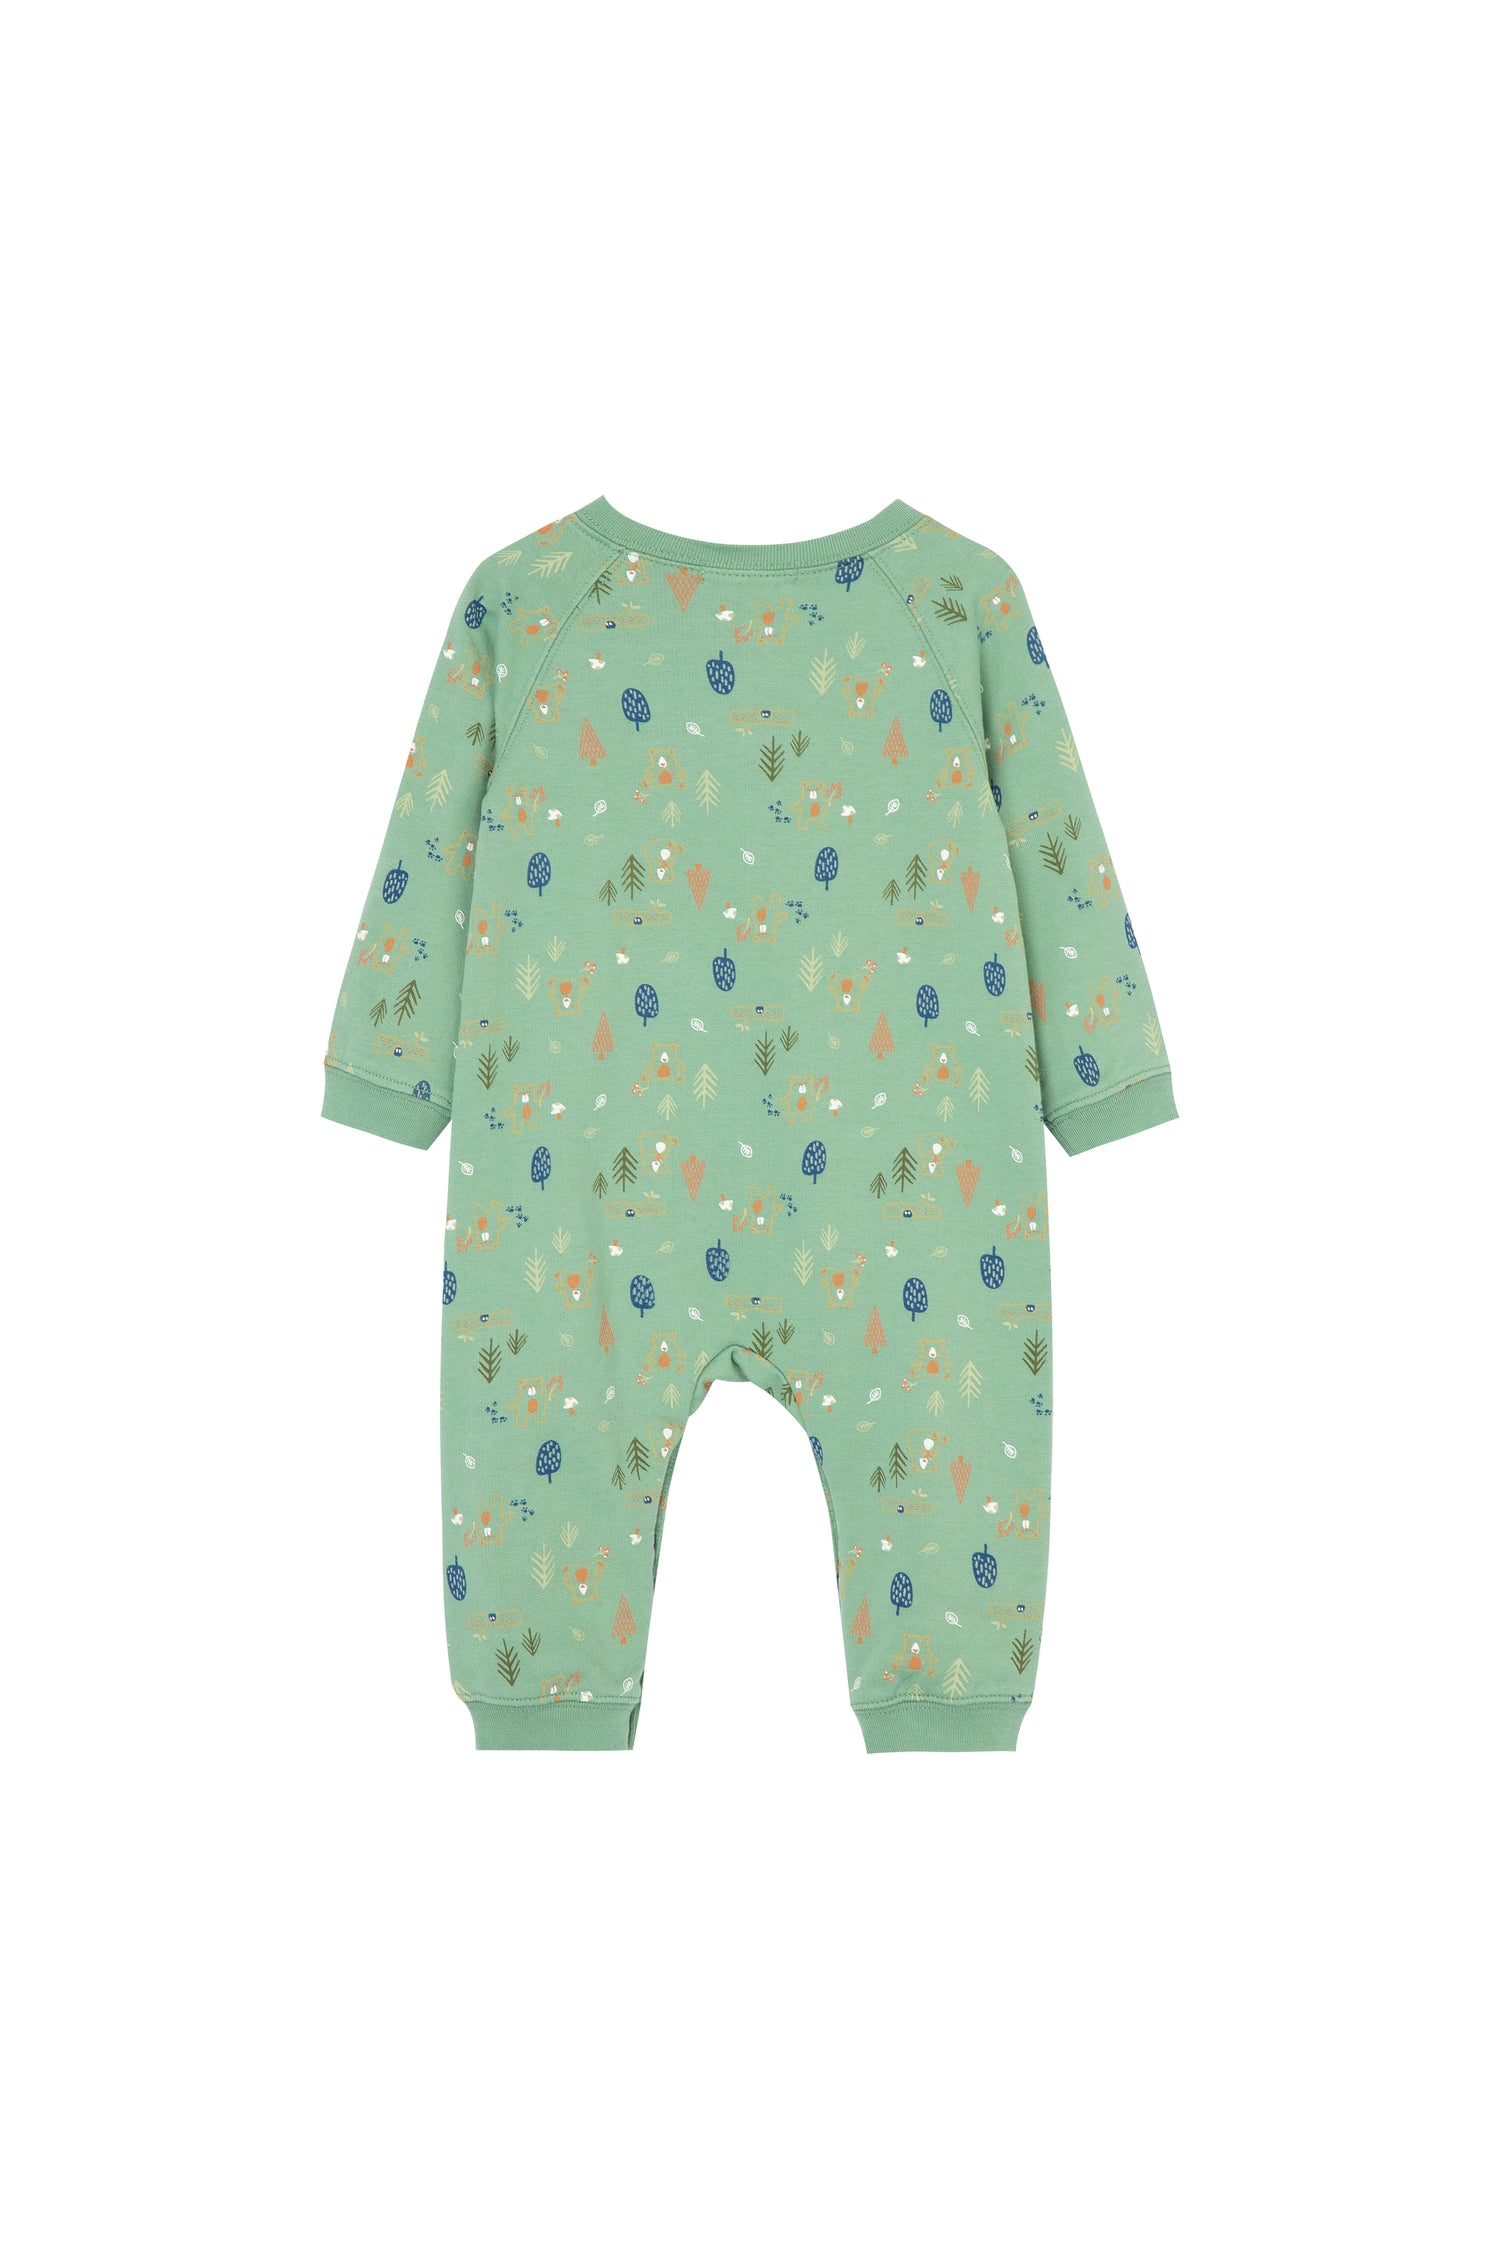 Back view of long sleeve coverall with woodland bears print